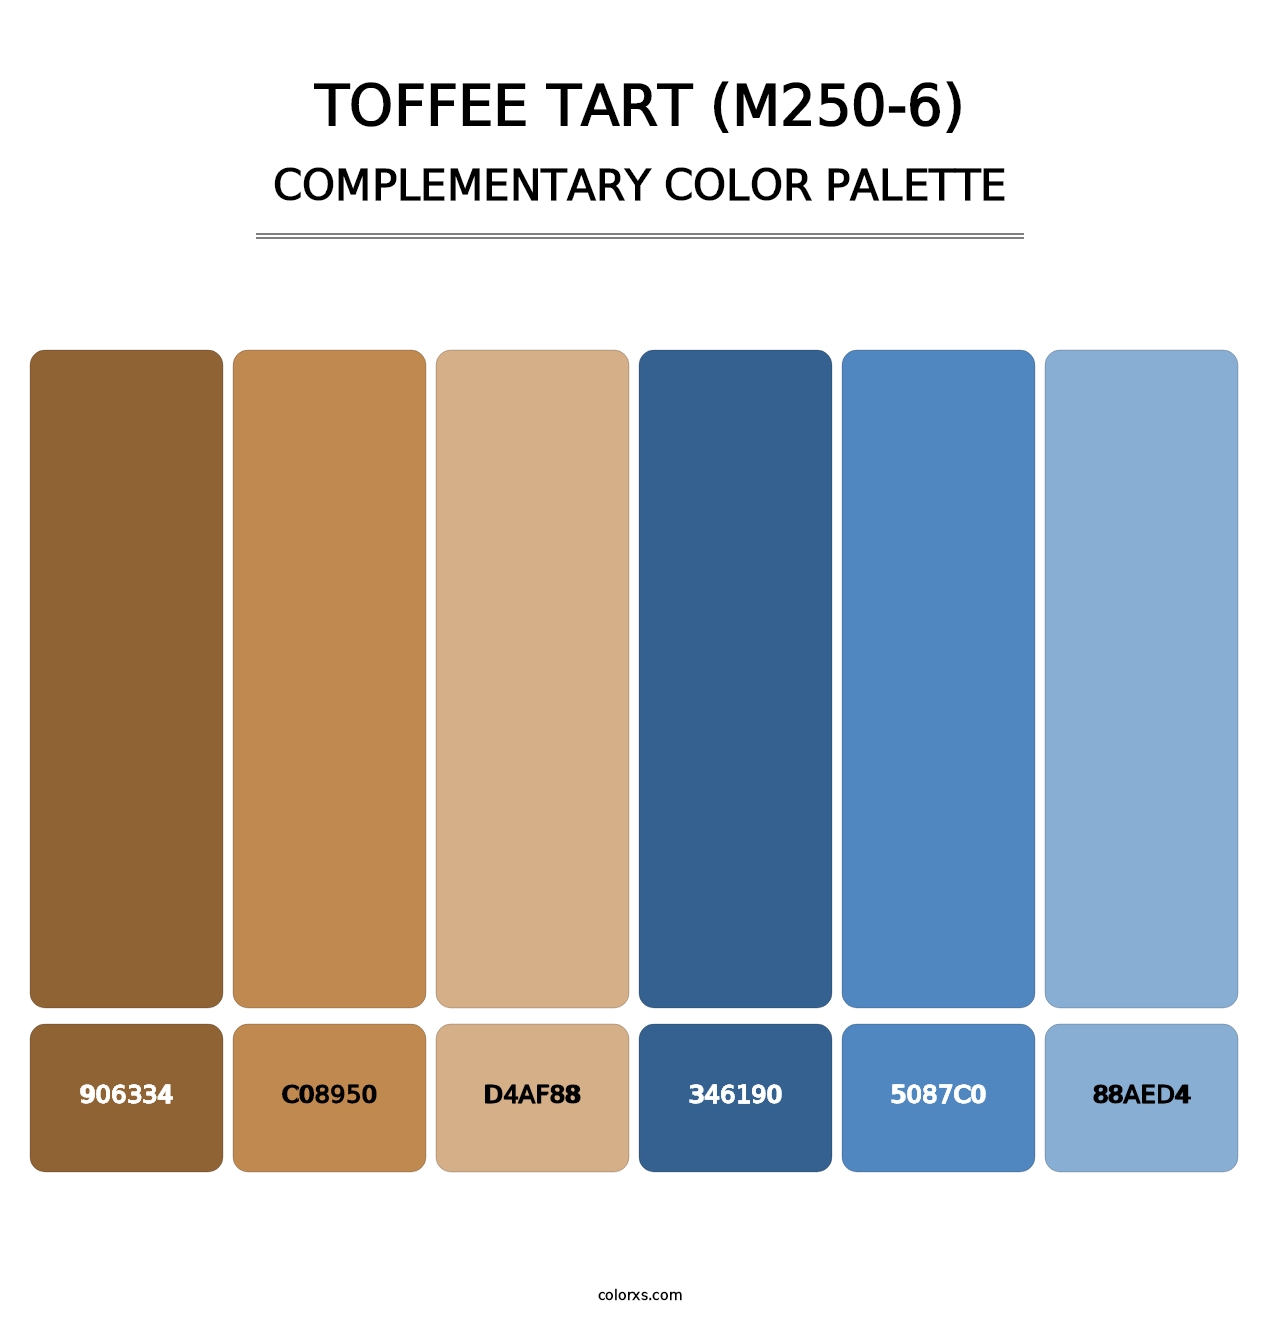 Toffee Tart (M250-6) - Complementary Color Palette